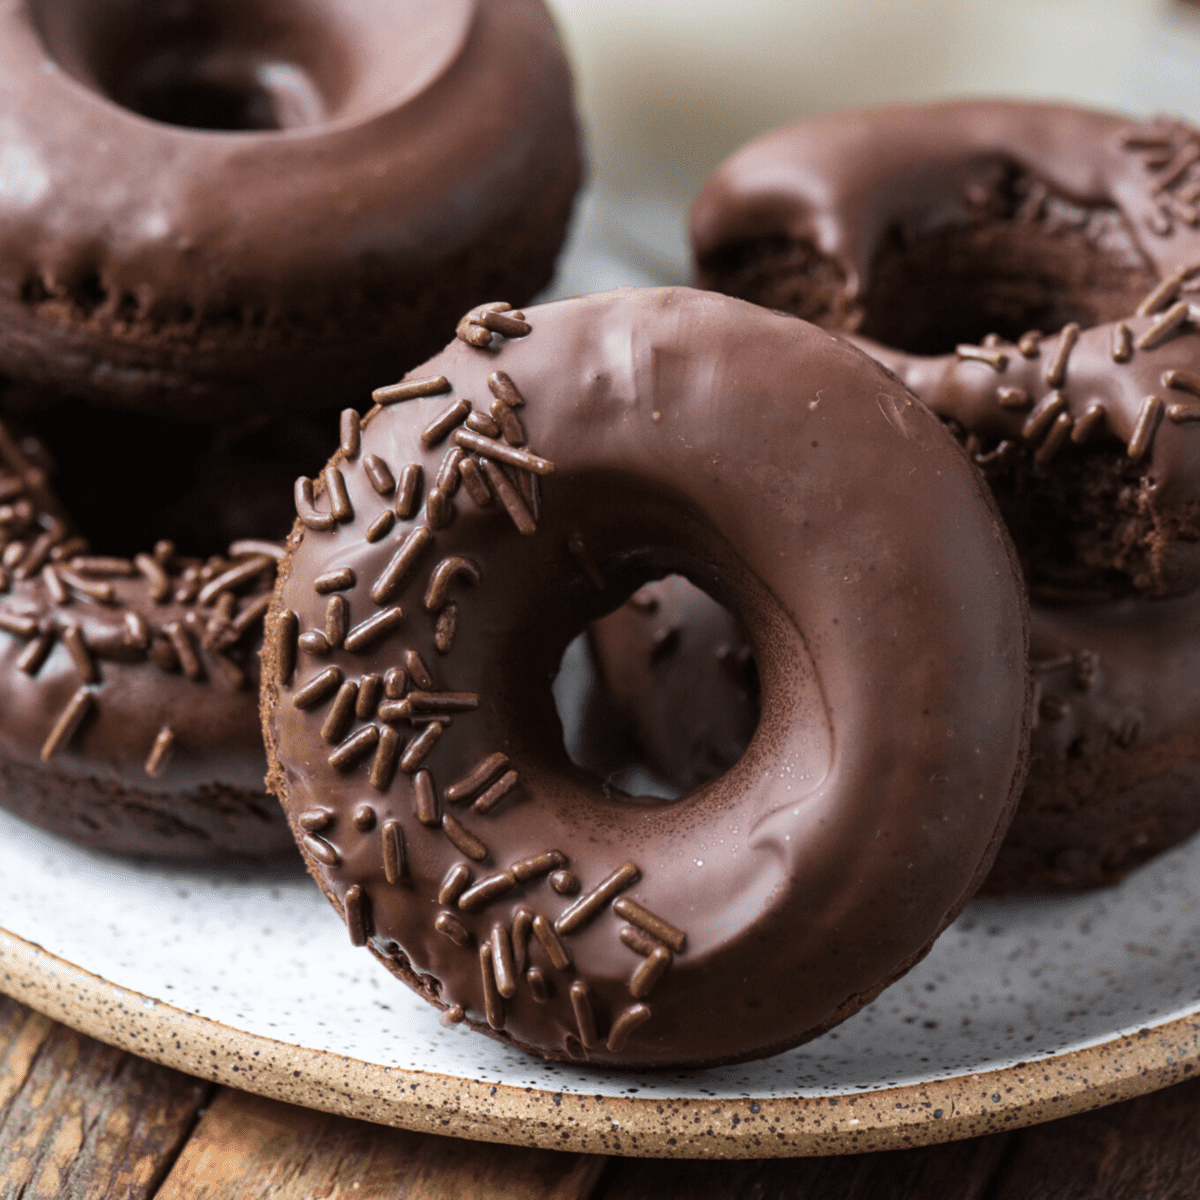 Chocolate Donuts - easy baked donuts covered in chocolate glaze!